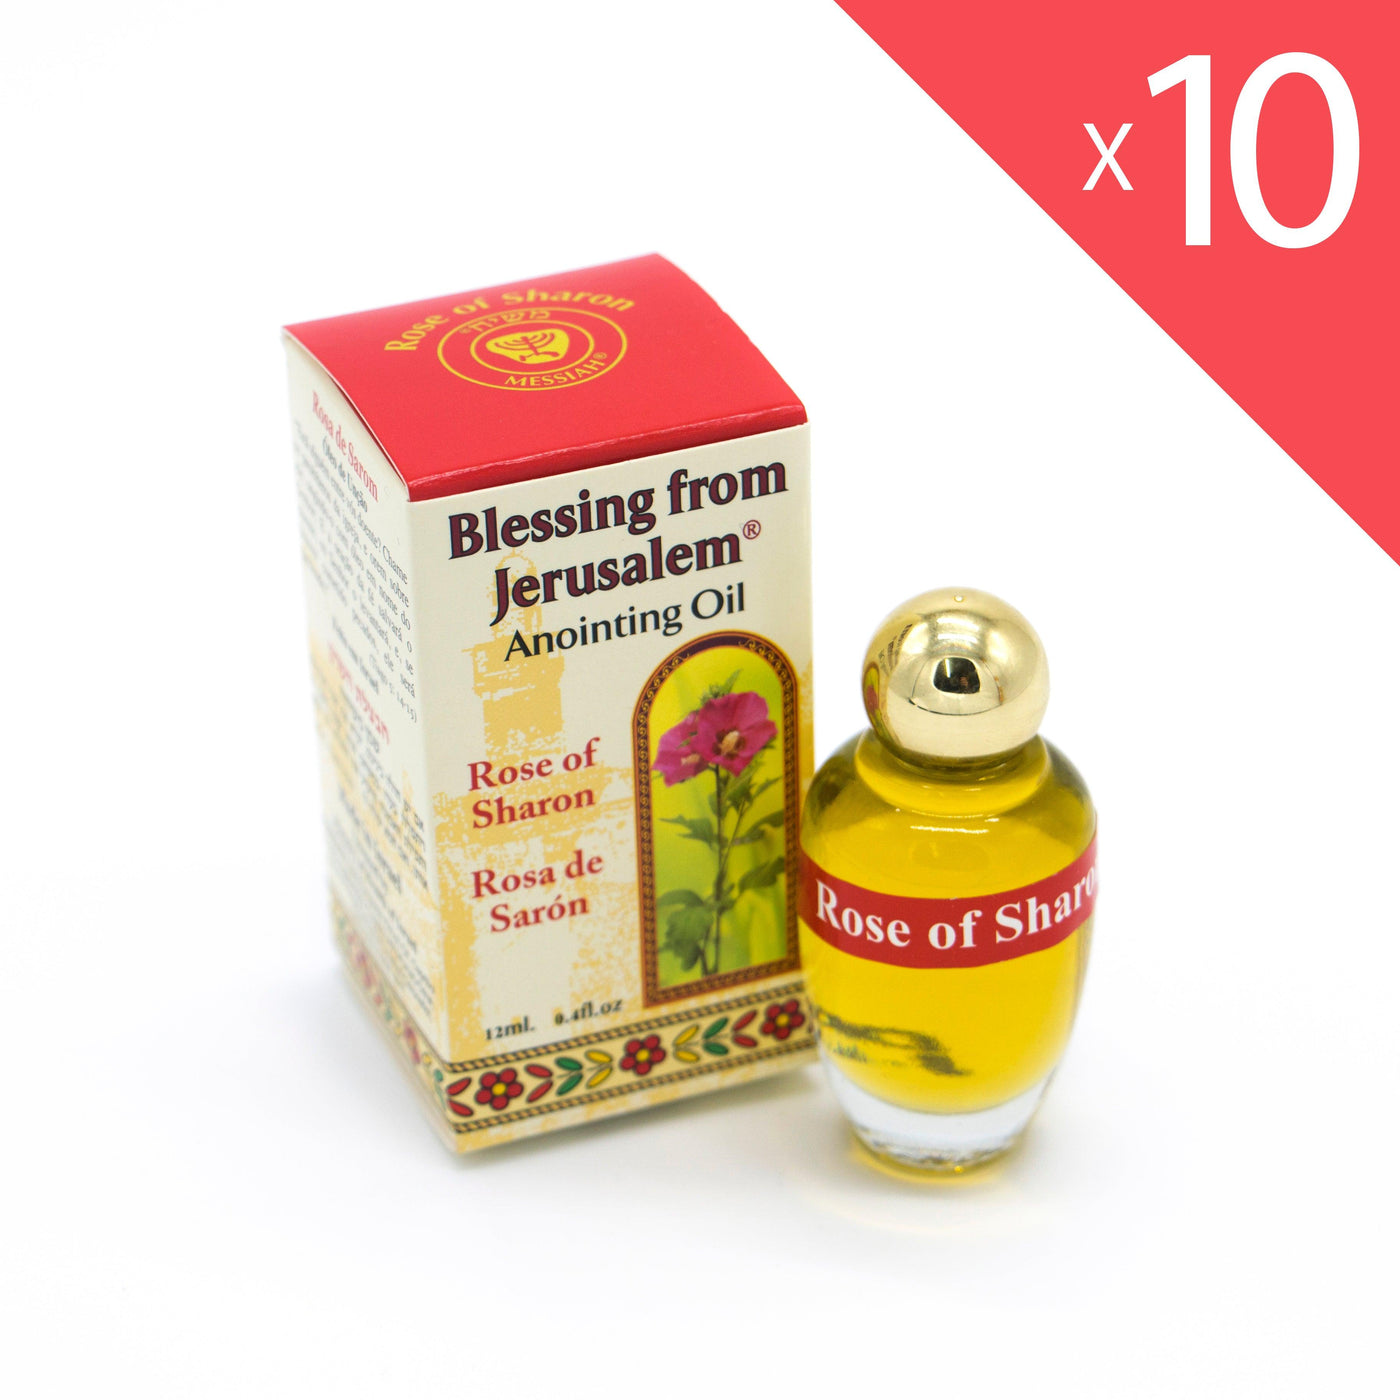 Lot of x 10 Anointing Oil Rose Of Sharon 12ml - 0.4oz From Holyland (10 bottles) - Spring Nahal